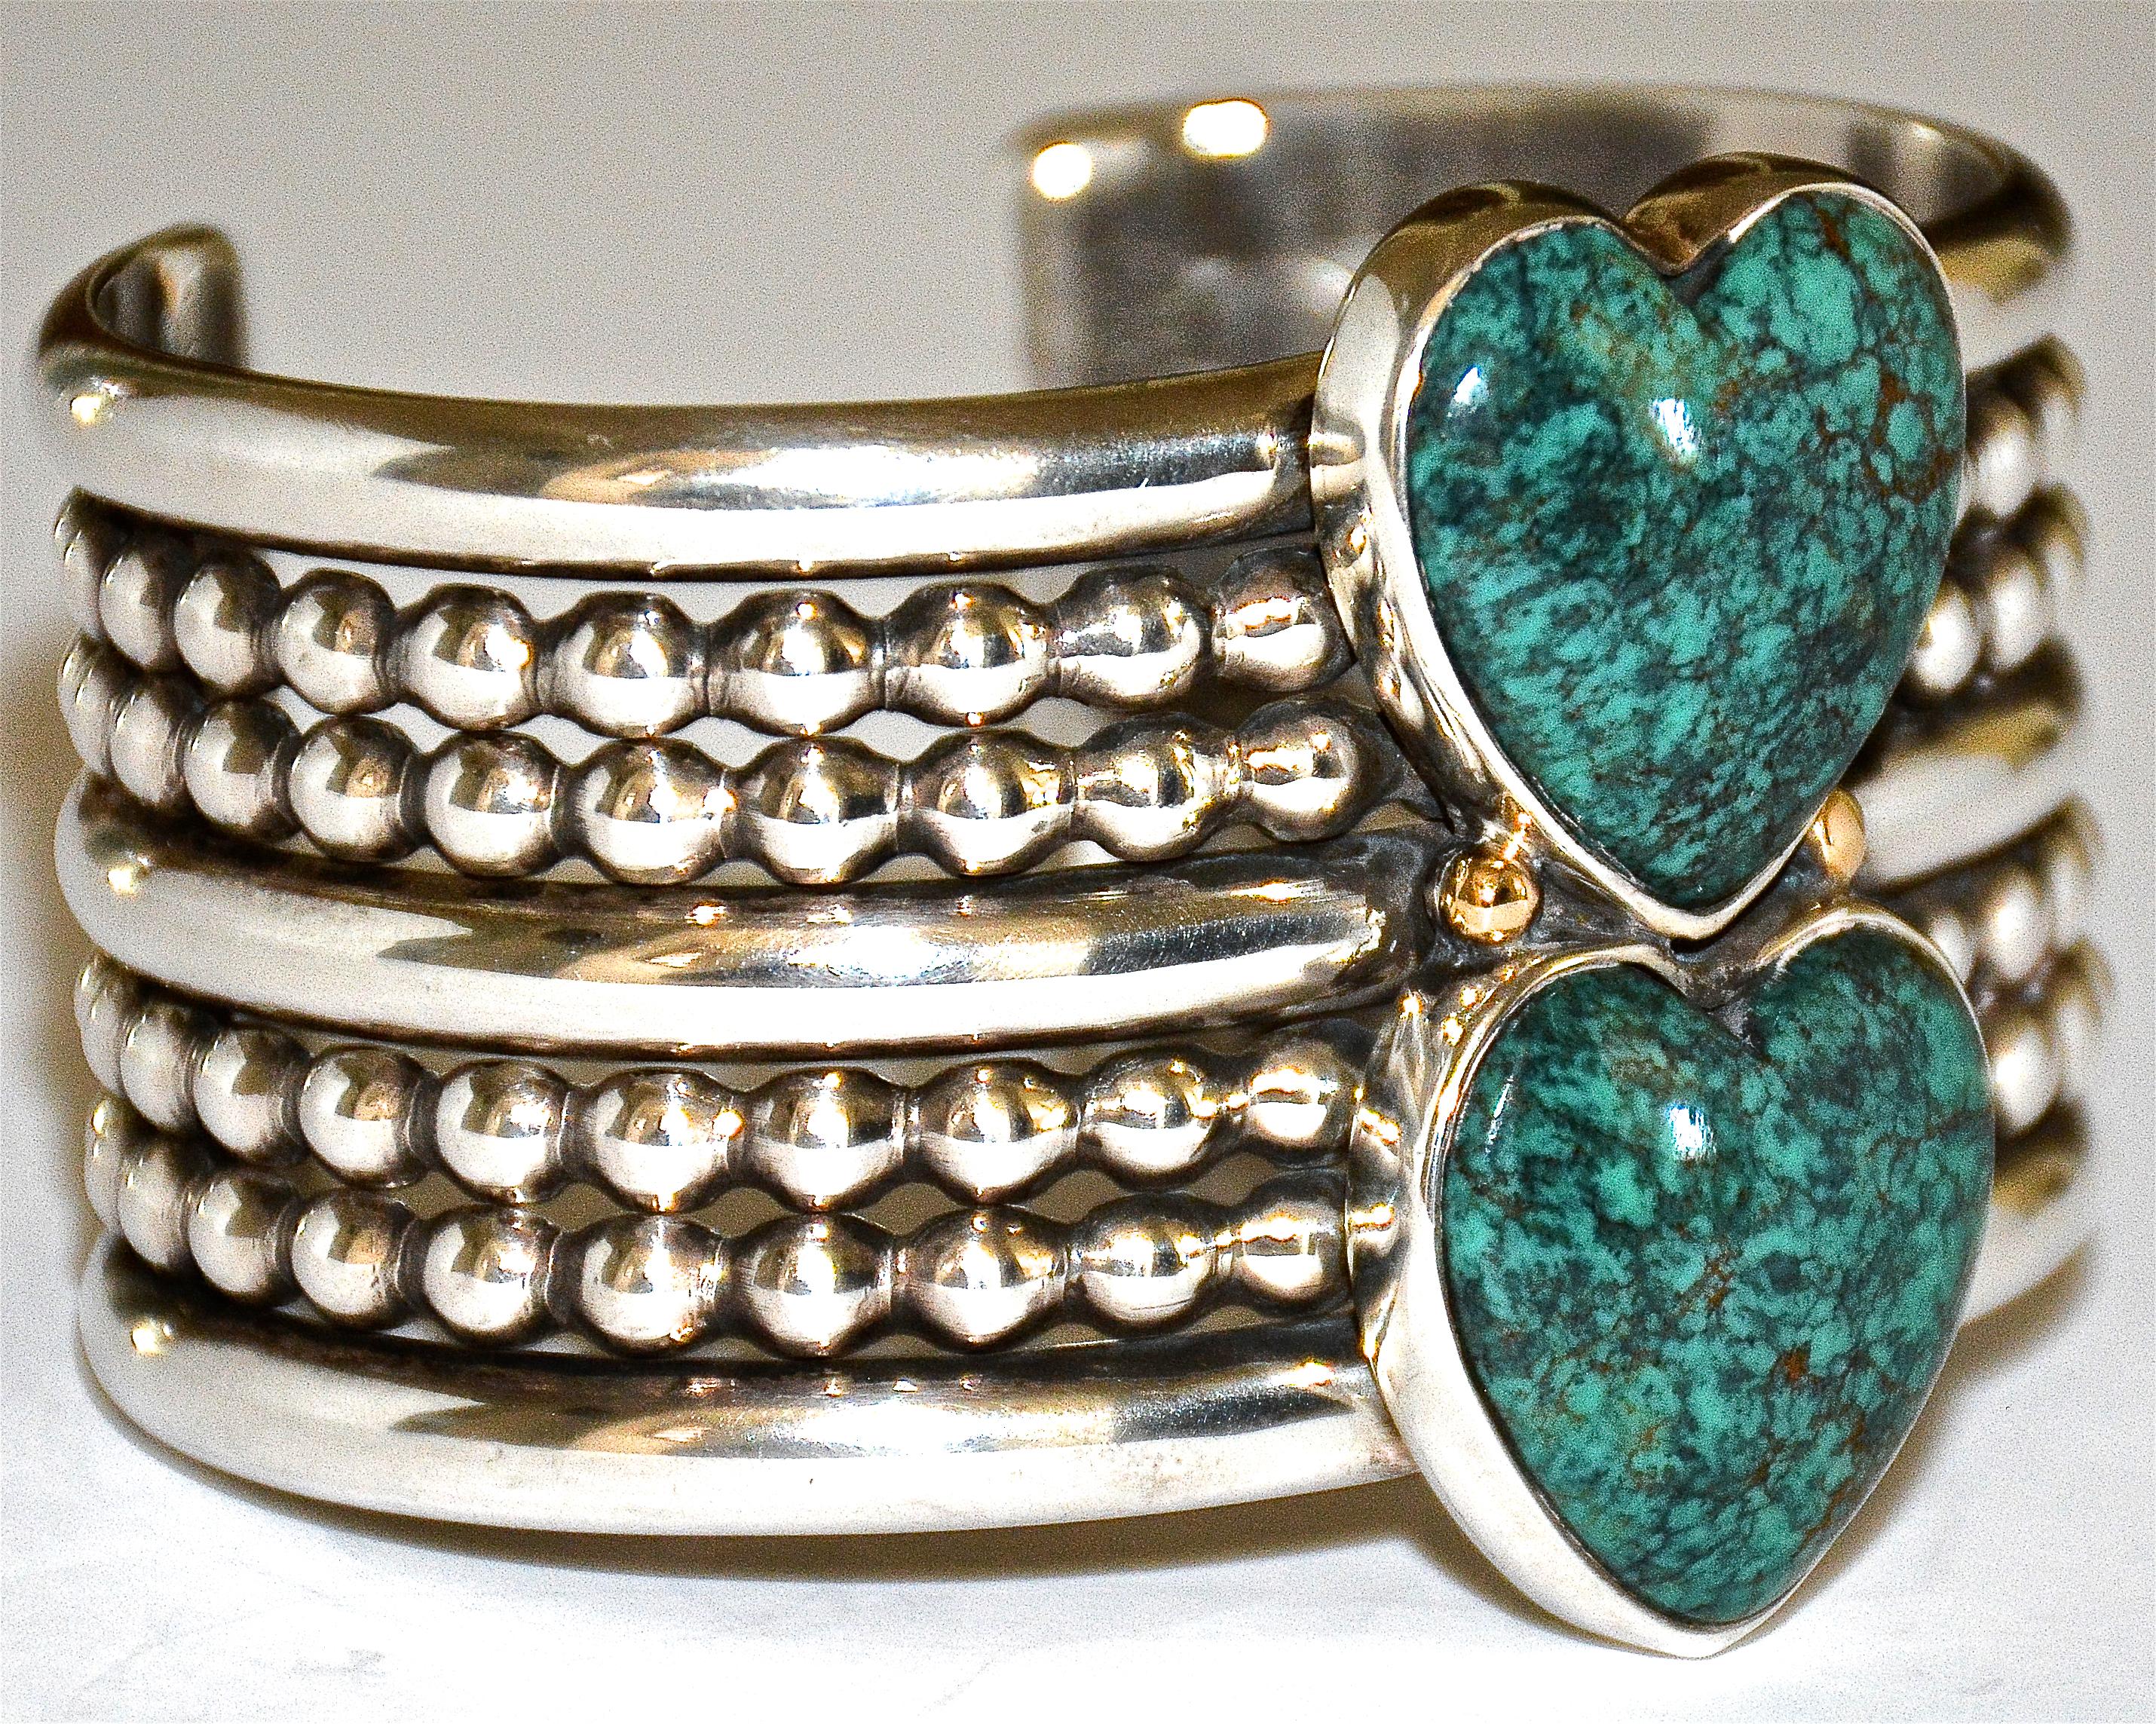 Elegant and beautiful Sterling Silver 7 Row Cuff Bracelet with Stormy Mountain Natural Turquoise Hearts by Mike Bird-Romero made in 1993. The two large stacked turquoise hearts are separated by two small gold capped balls. Stamped with Mike Bird's